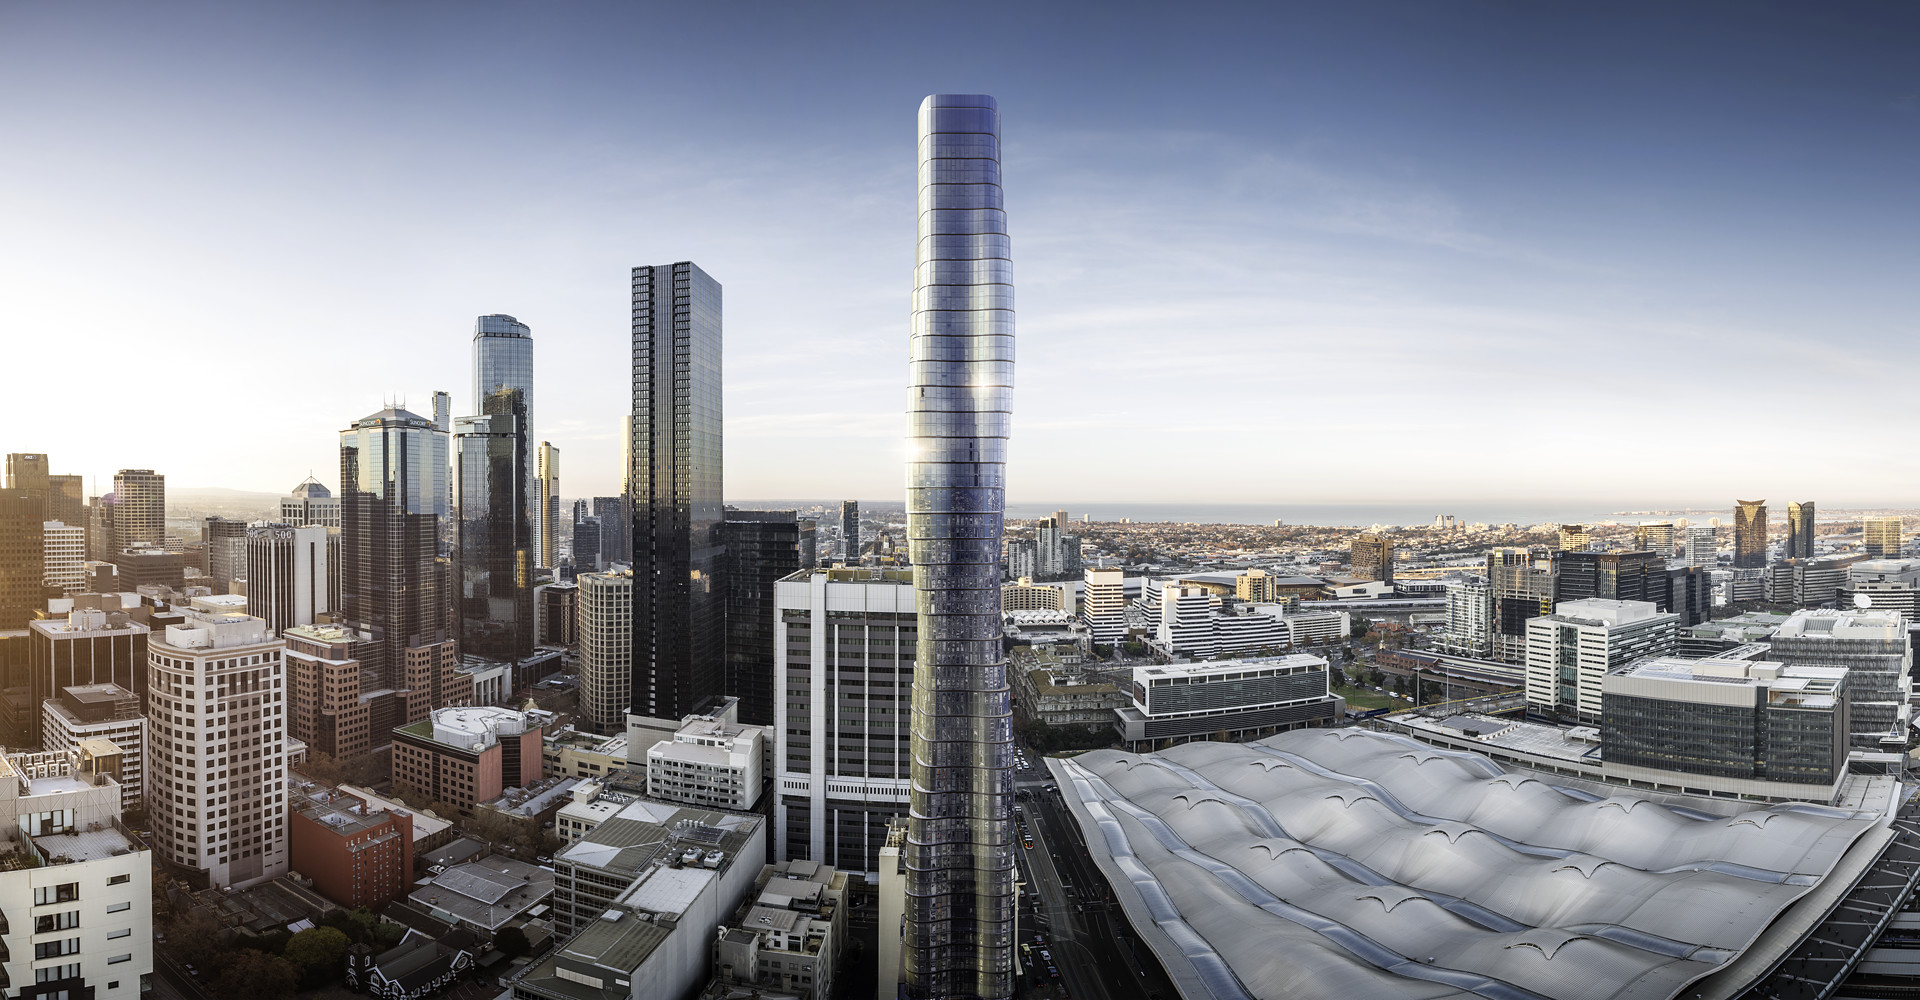 The proposed Premier Tower was inspired by Beyoncé's "Ghost" video.